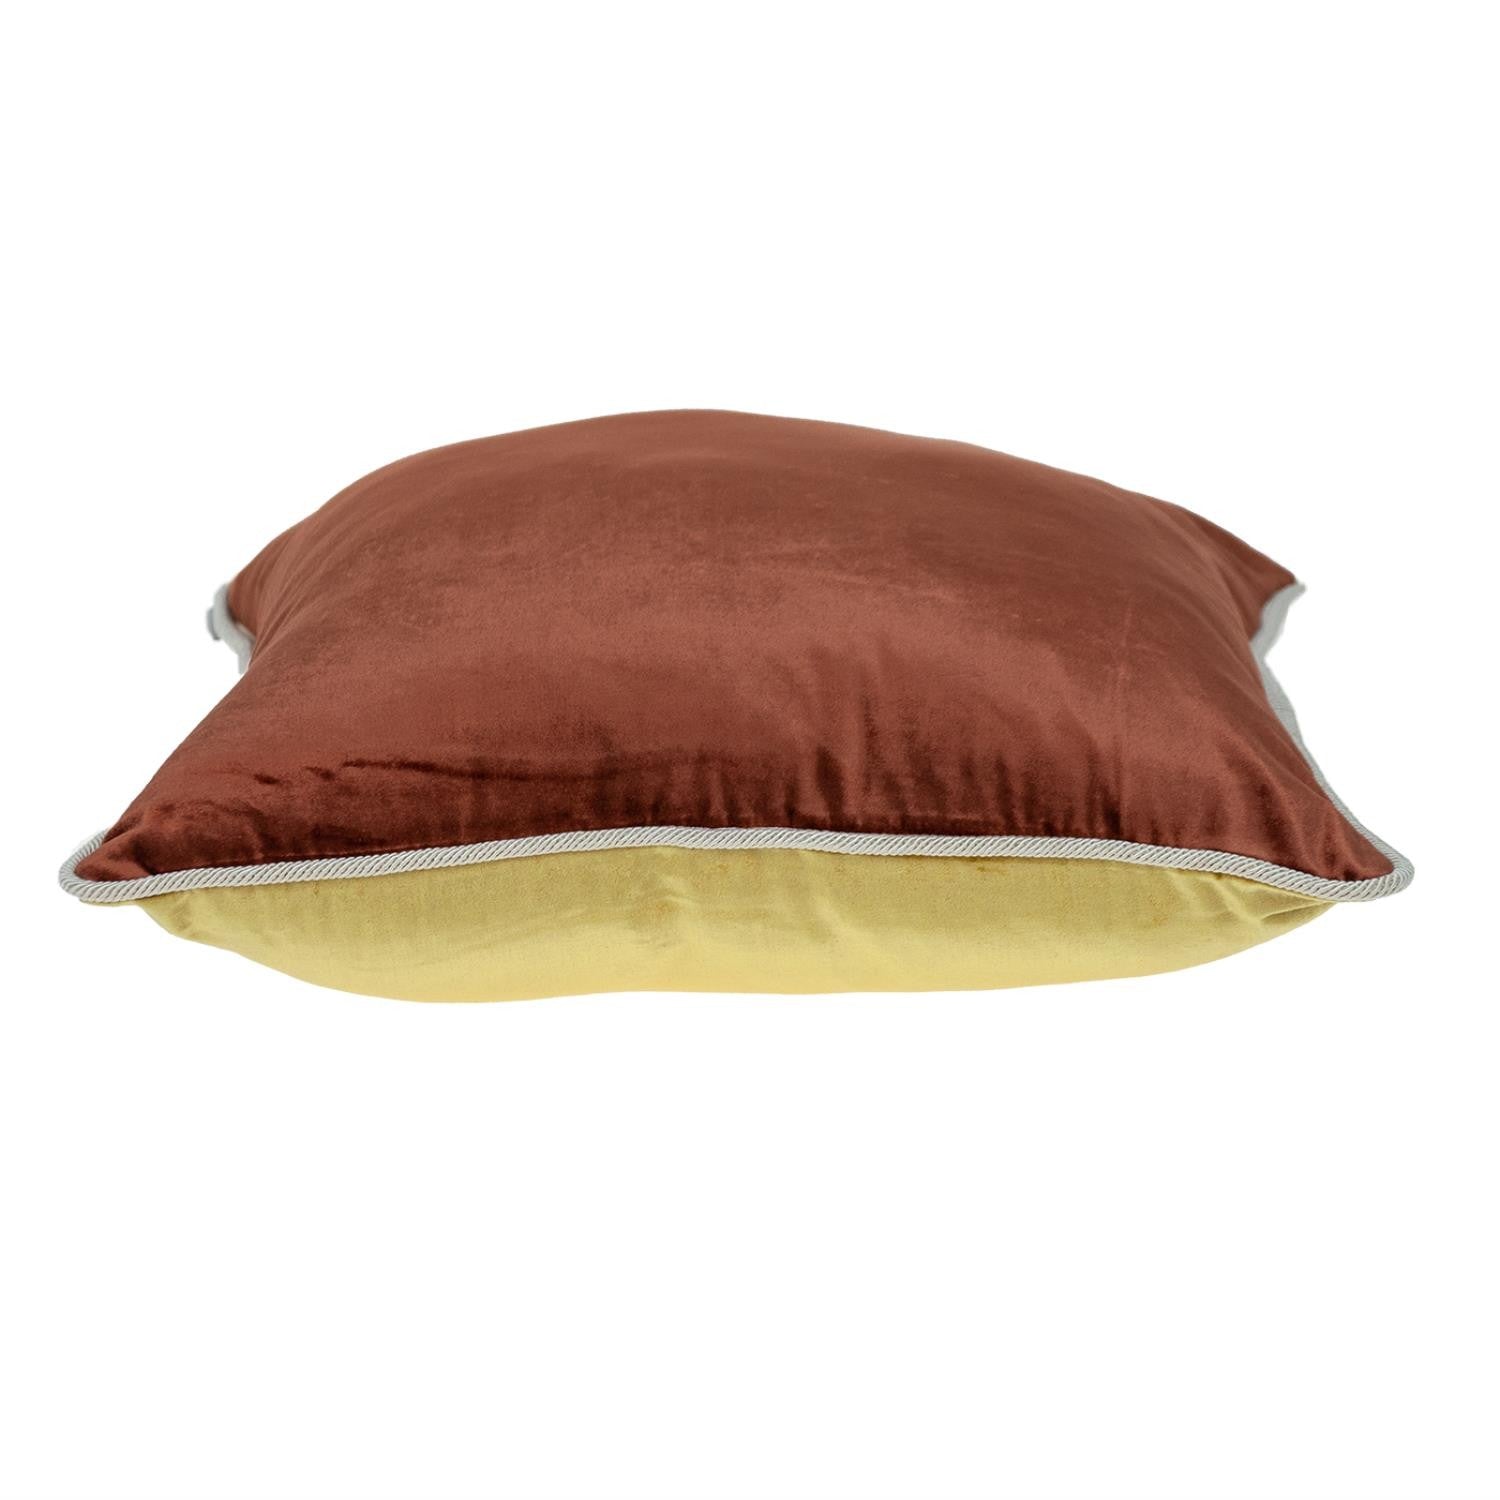 Reversible Gold and Brown Square Velvet Throw Pillow